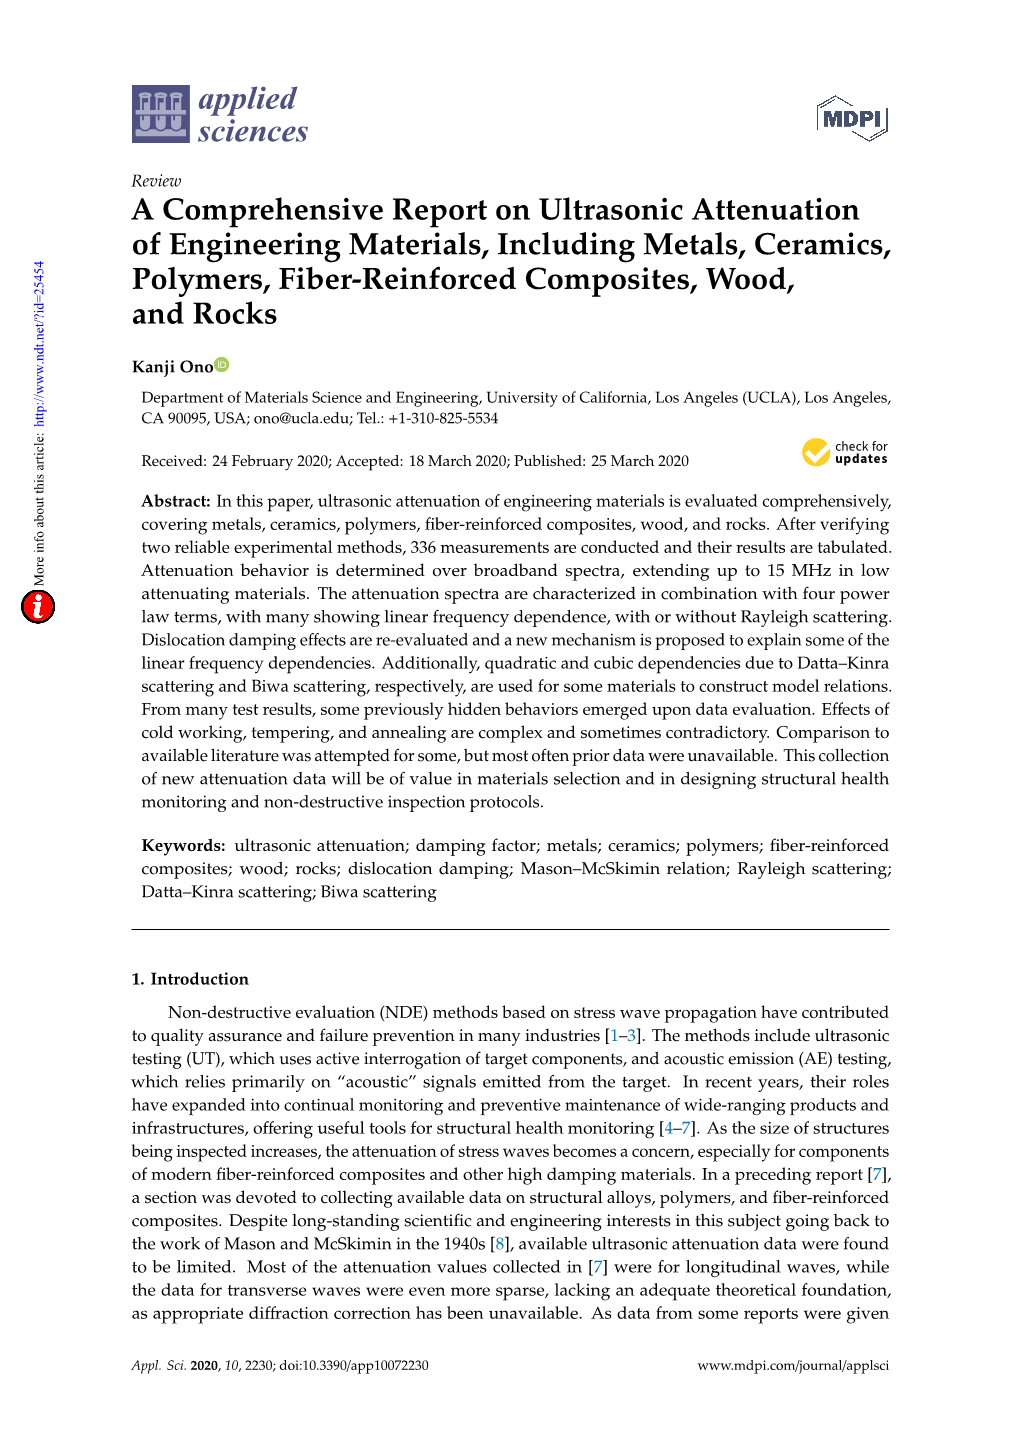 A Comprehensive Report on Ultrasonic Attenuation of Engineering Materials, Including Metals, Ceramics, Polymers, Fiber-Reinforced Composites, Wood, and Rocks